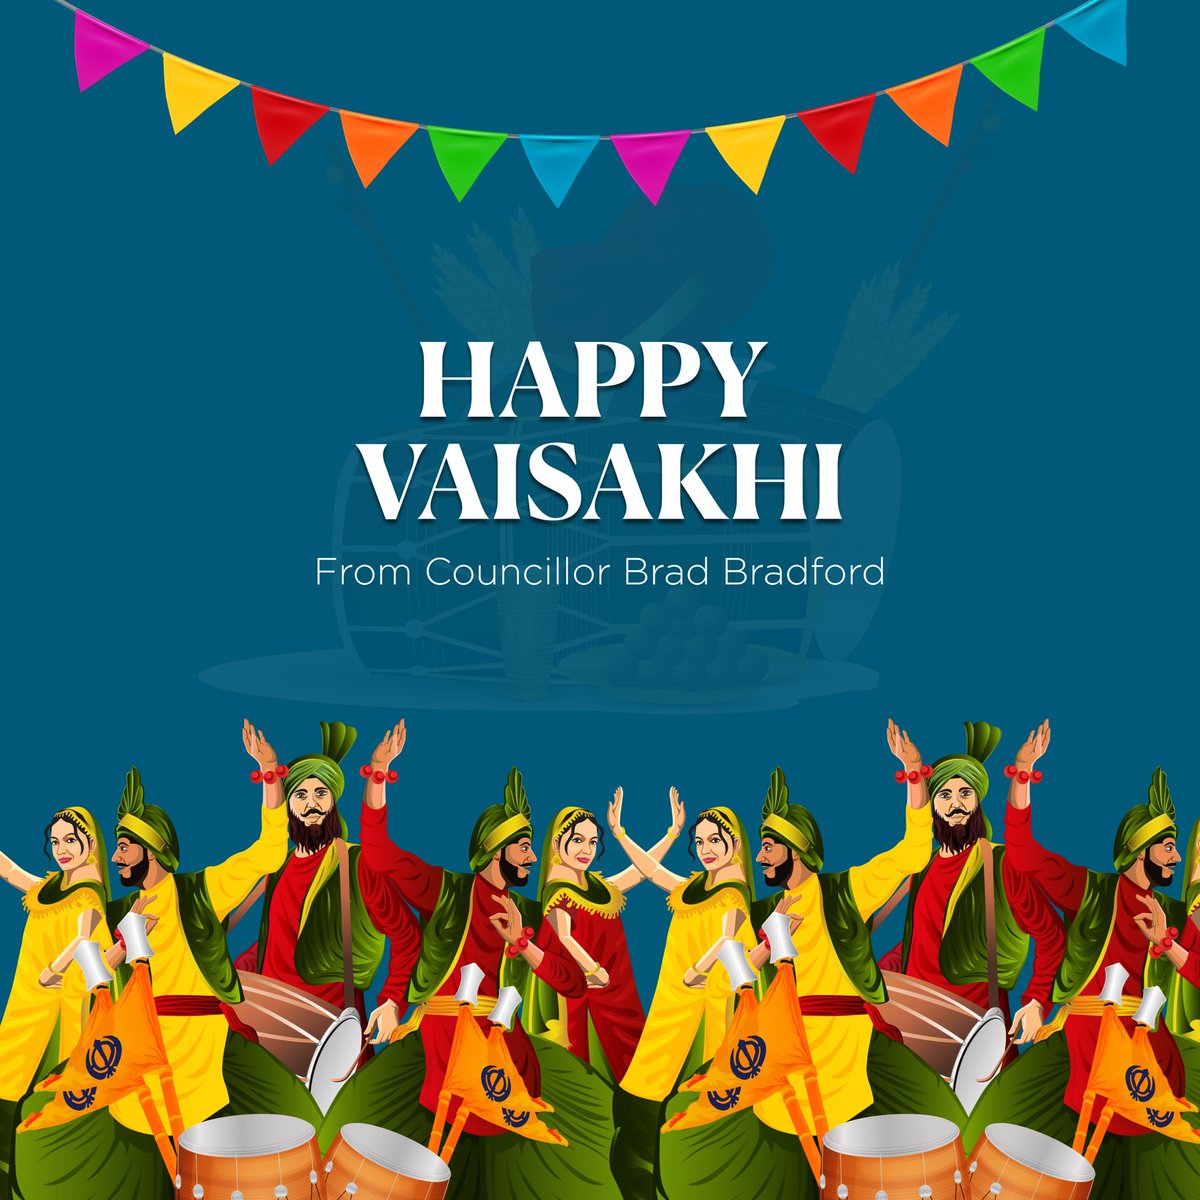 Happy Vaisakhi! 🎉 Wishing Toronto’s Sikh community a year filled with blessings, joy, and prosperity. Let's celebrate the spirit of unity and community. #Vaisakhi #SikhNewYear #Vaisakhi2024 #SikhHeritageMonth